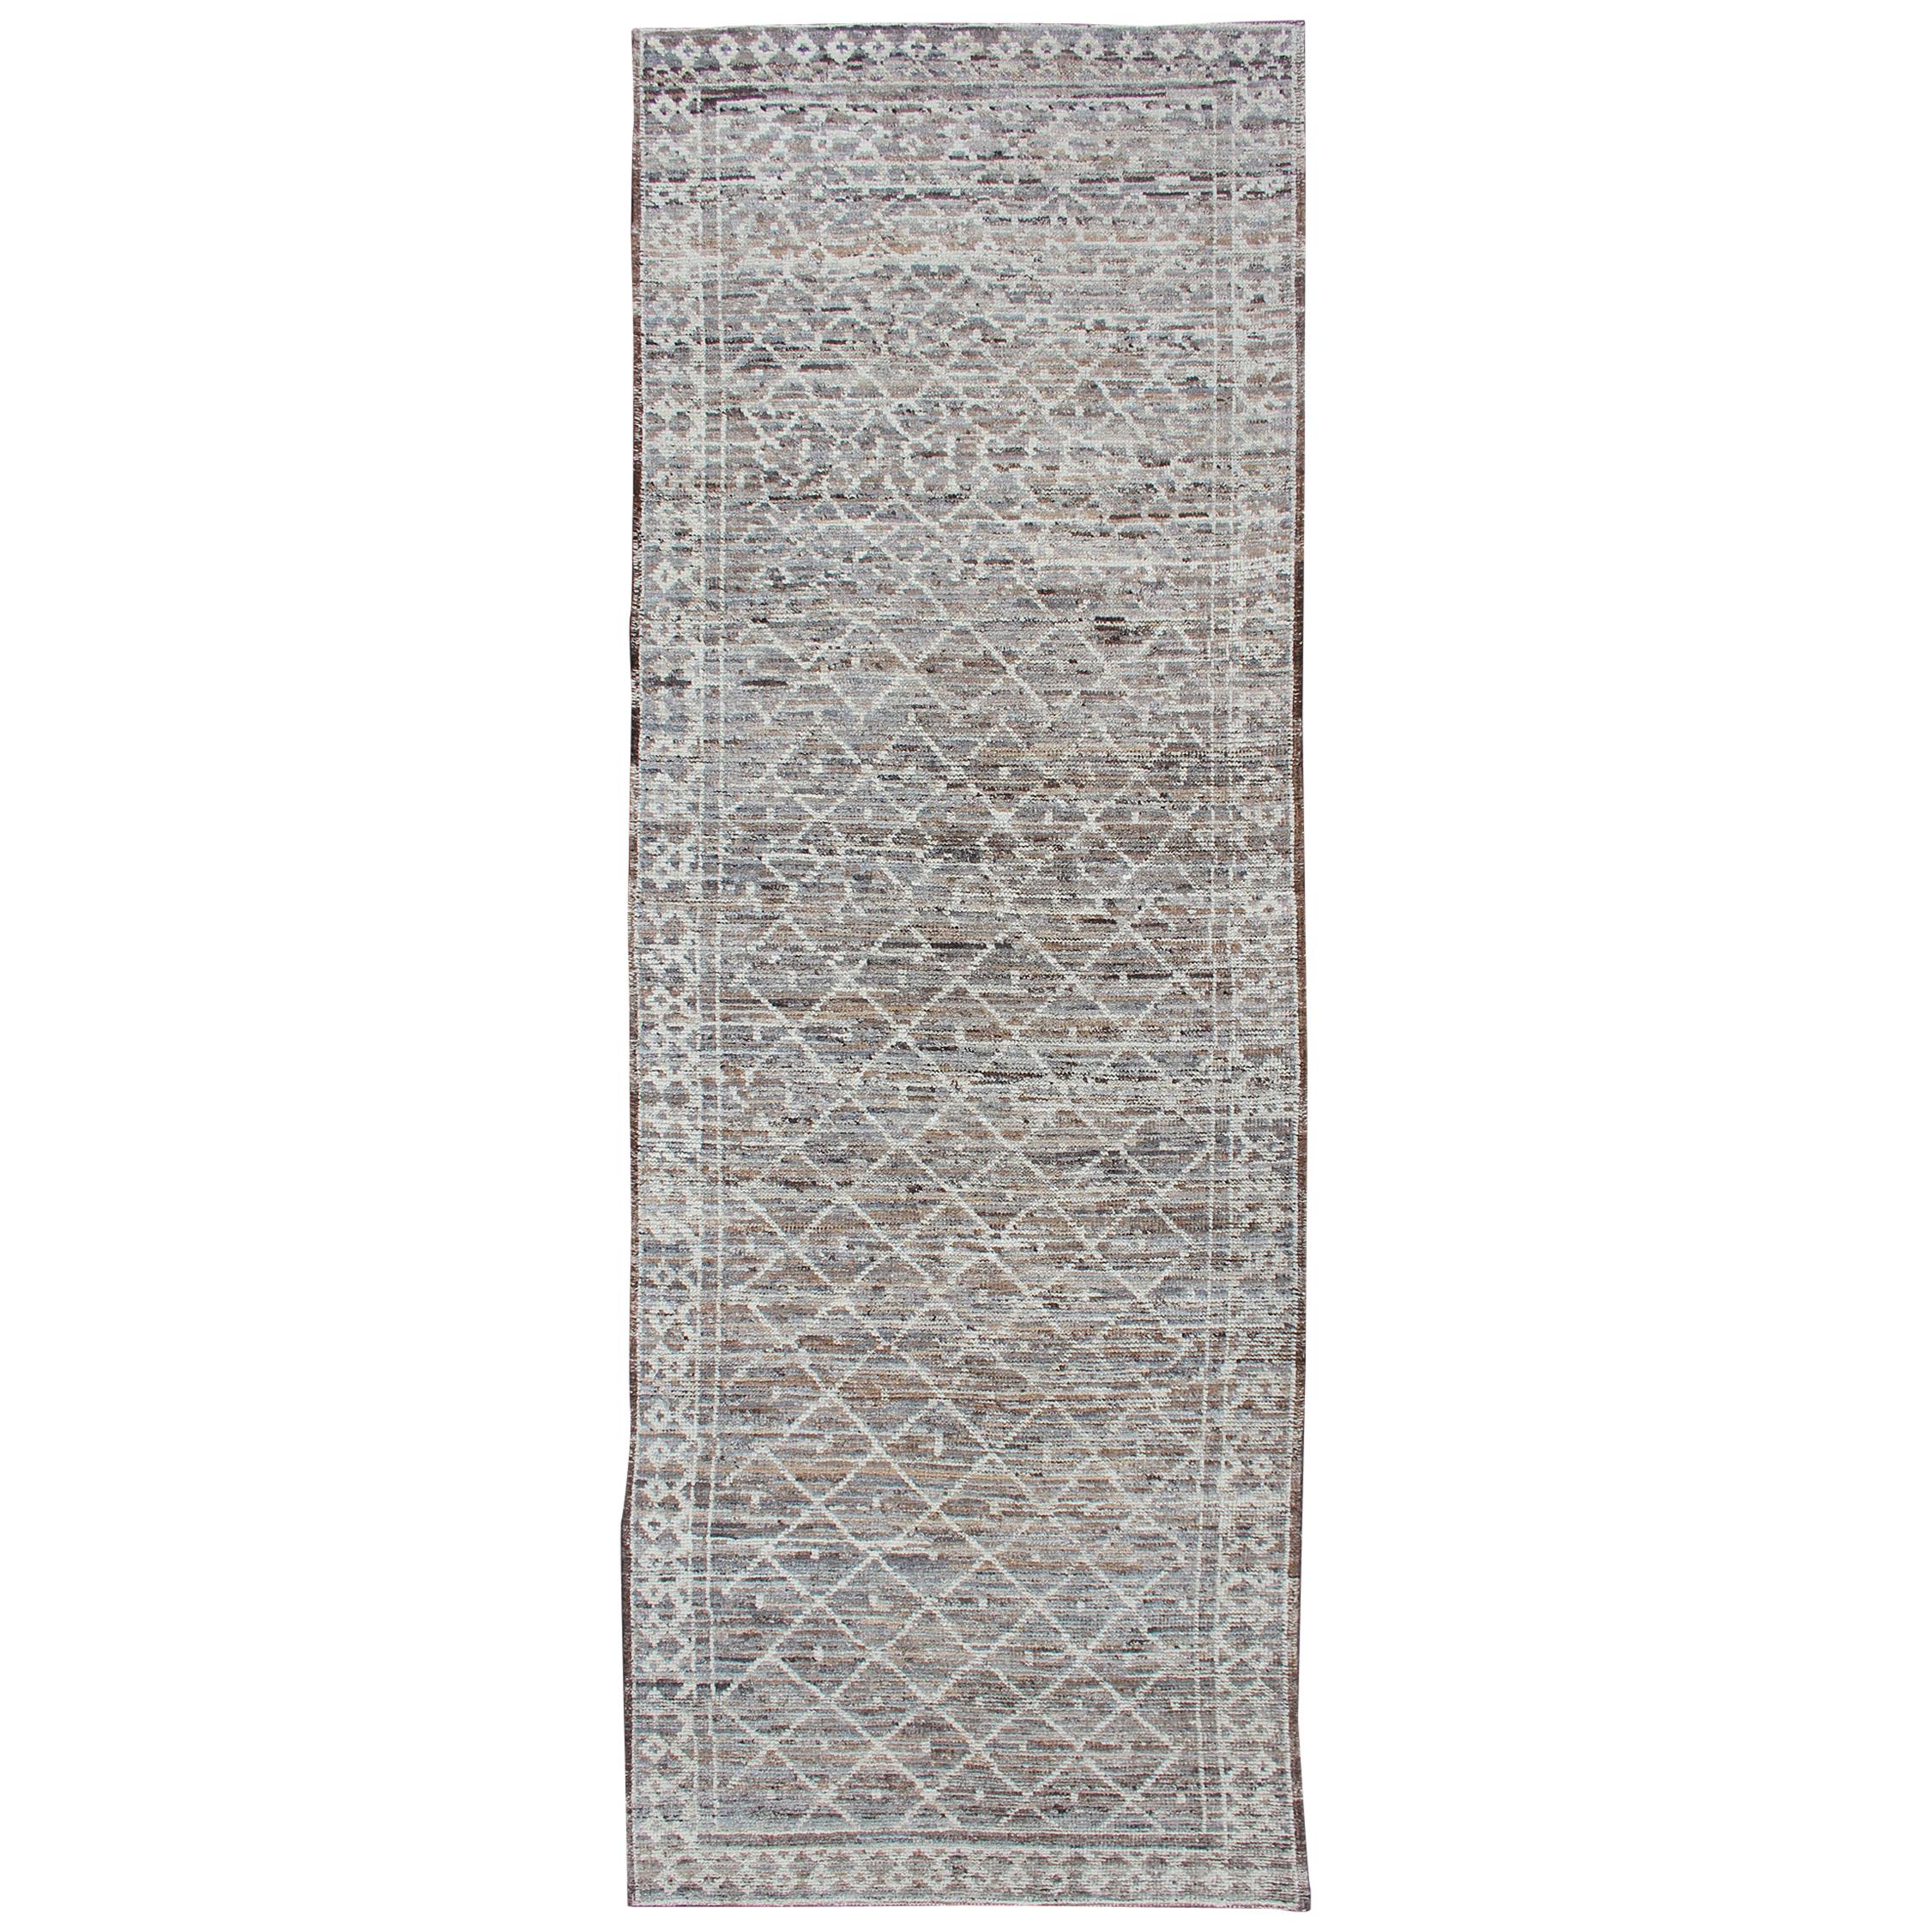 Modern Rug with Tribal Design in Light Gray, Taupe, Brown and Naturals Colors